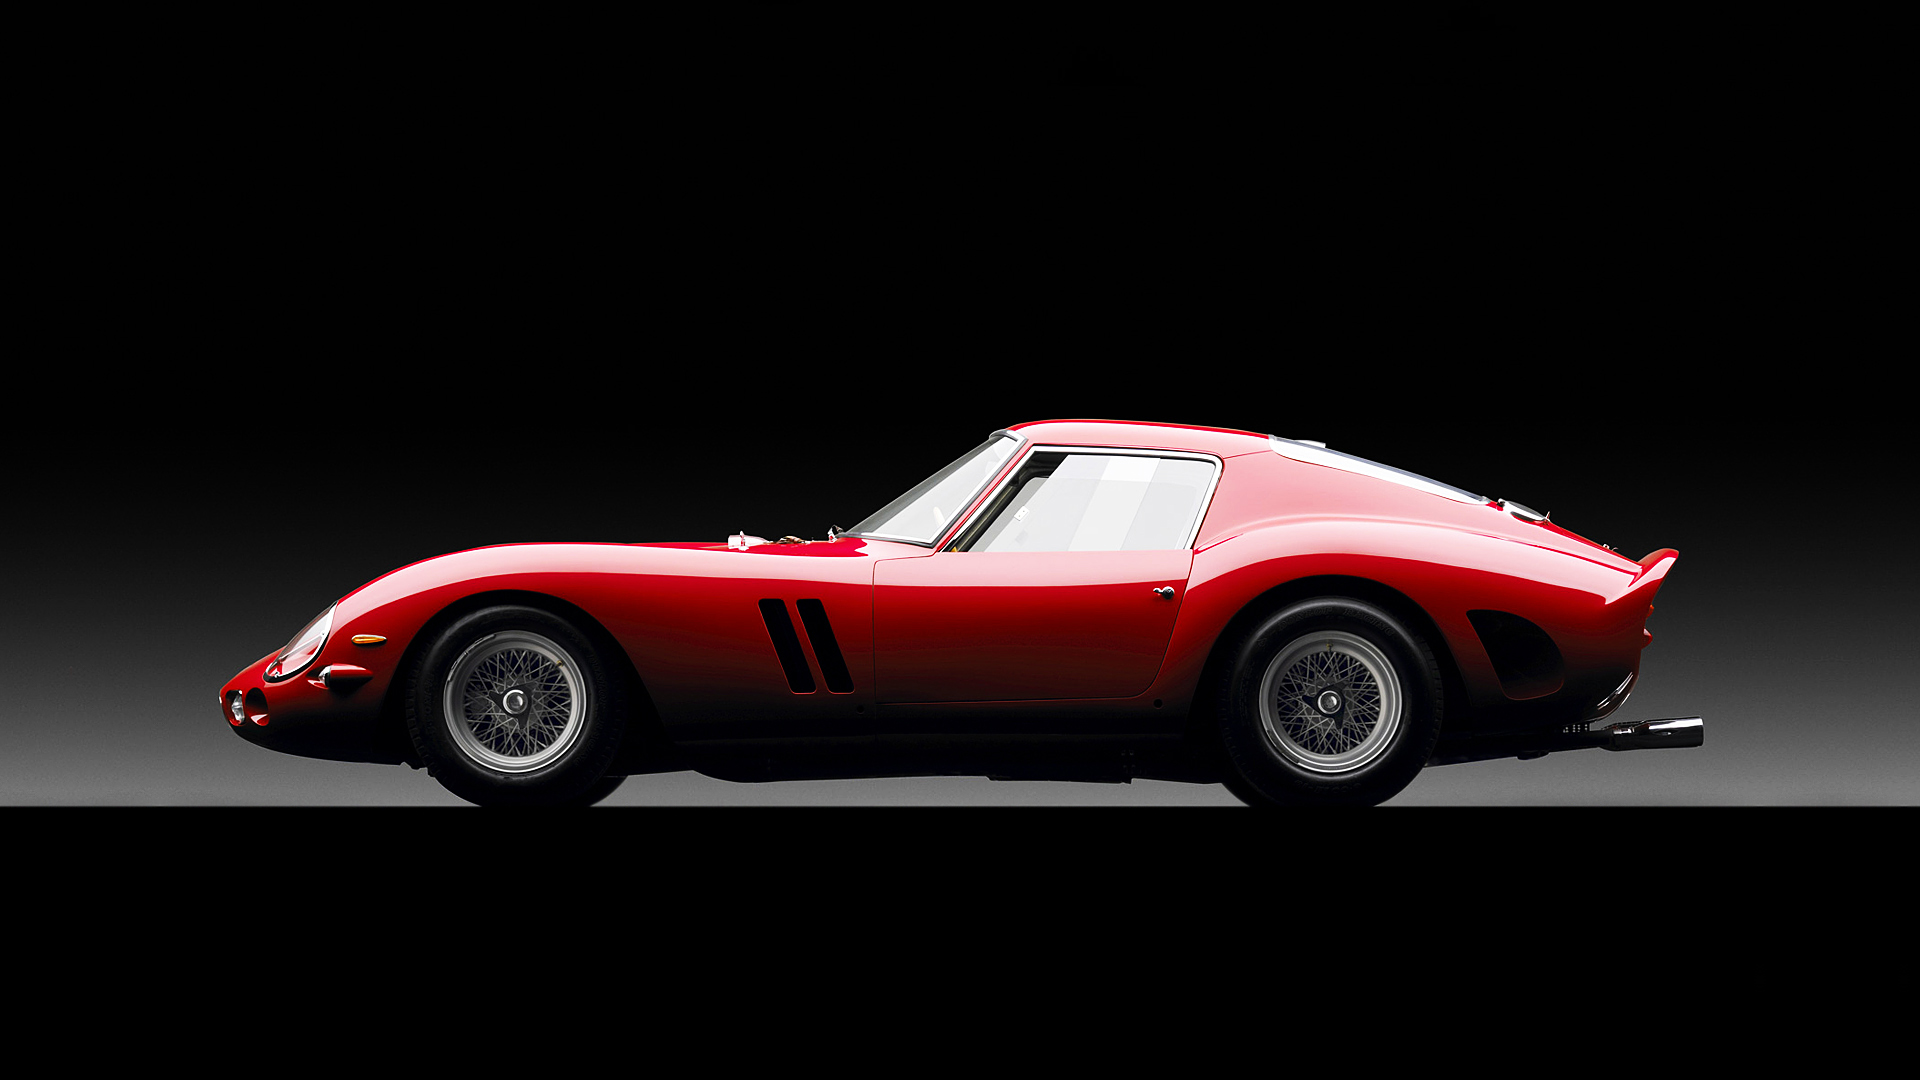  Ferrari Gto Wallpapers Hd Images Wsupercars